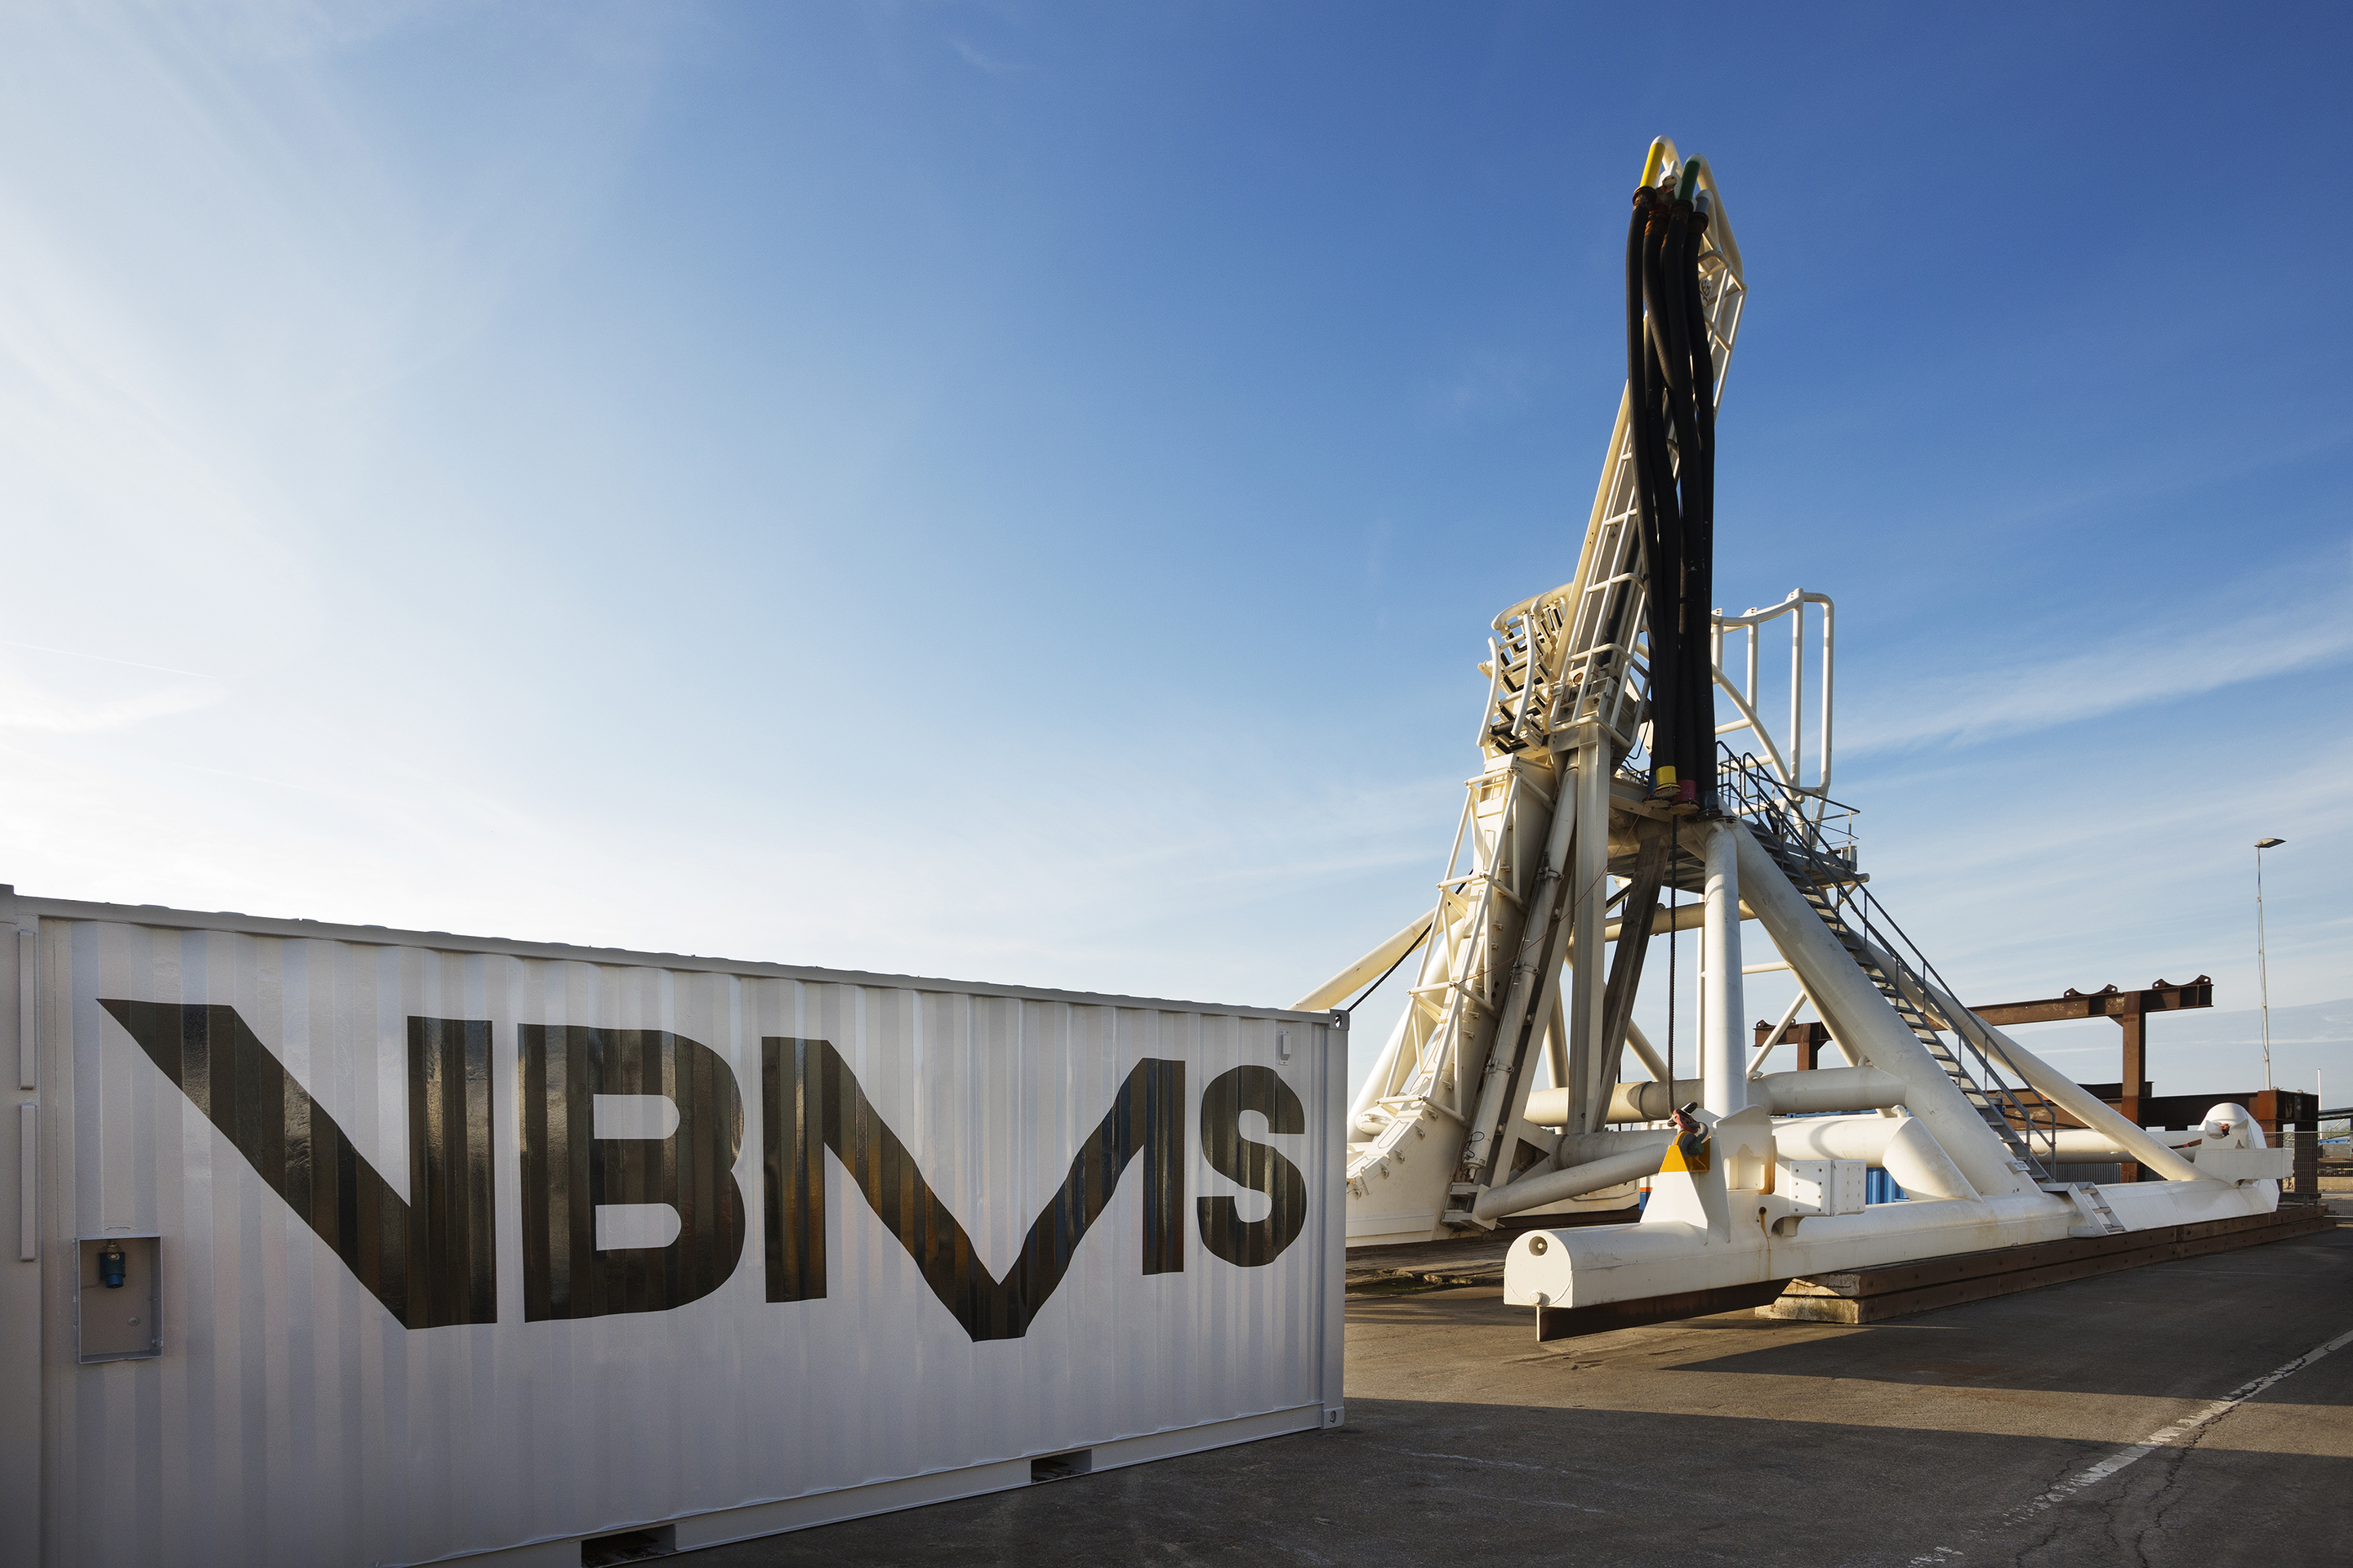 studio dumbar design visual brand identity for VBMS expert in offshore installations container design